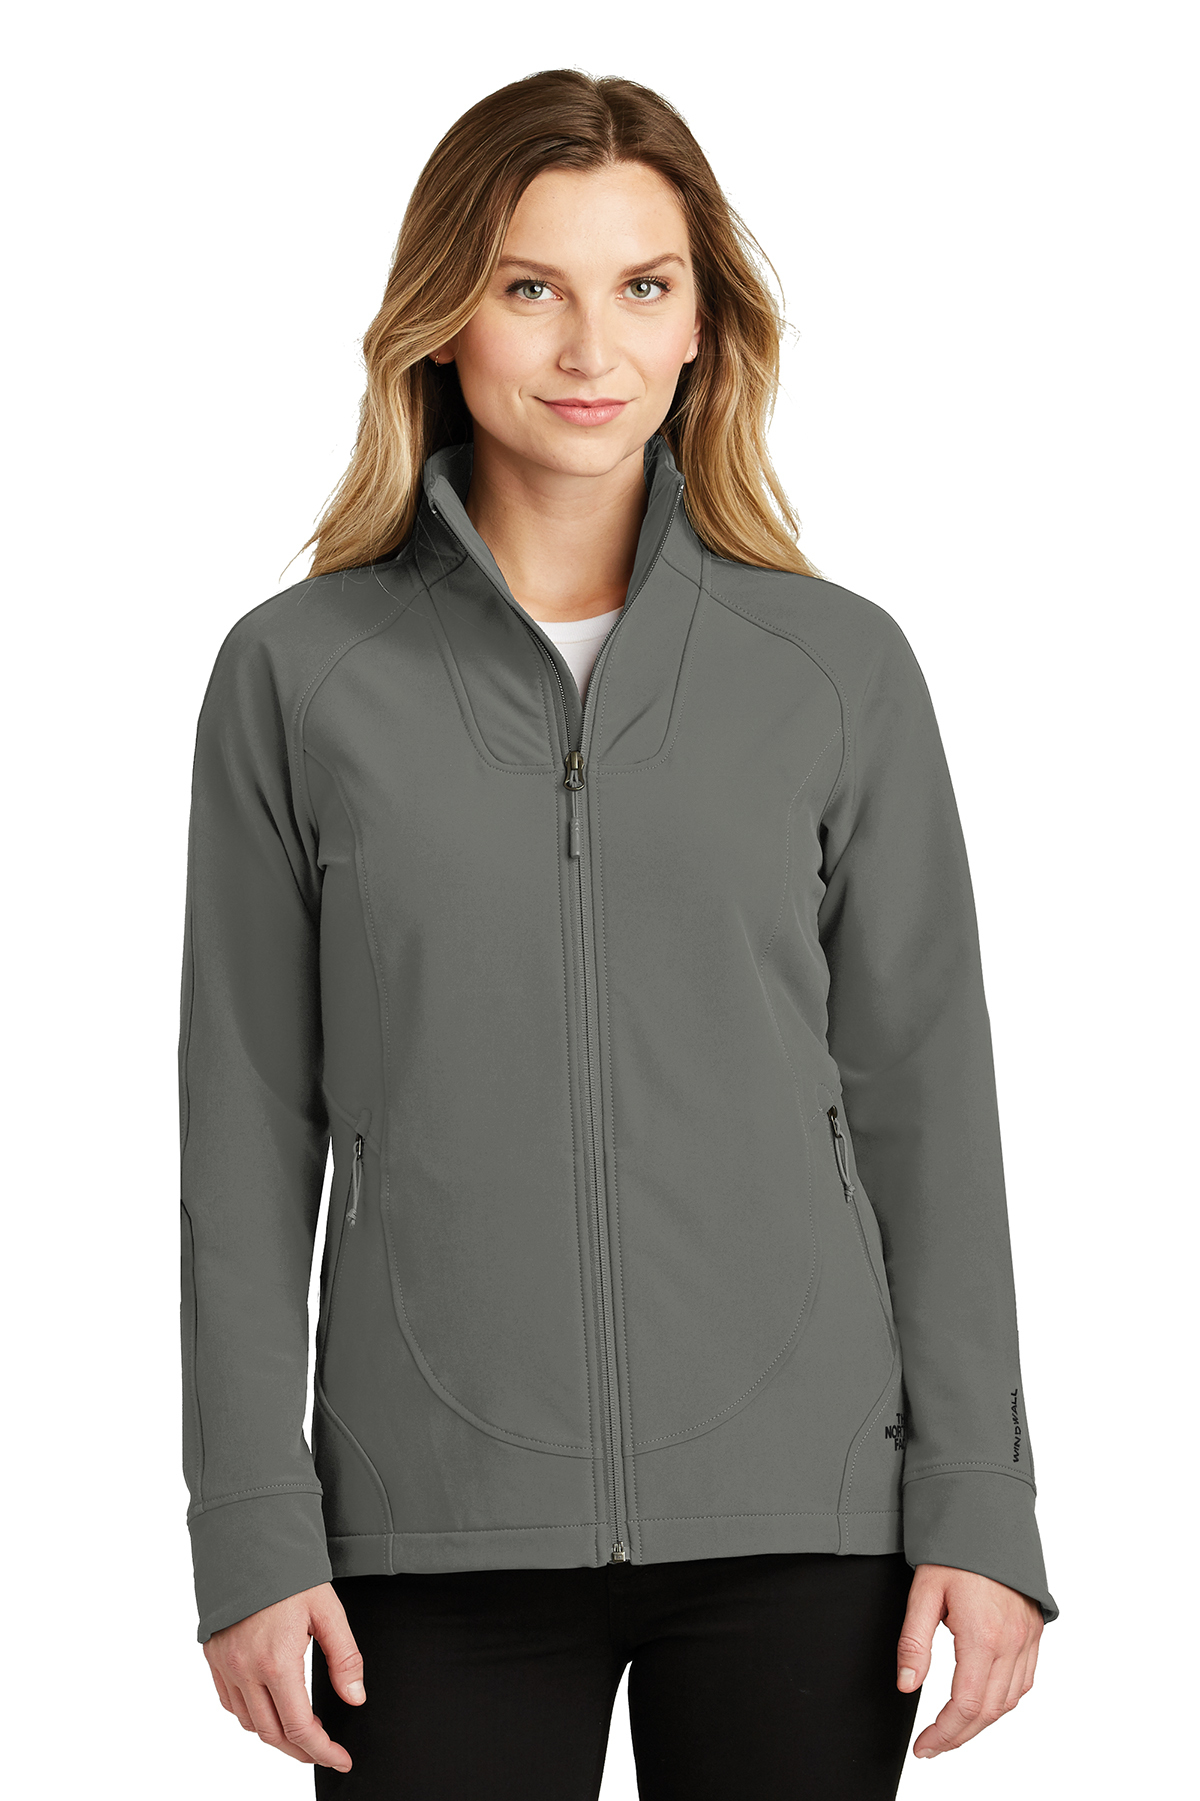 The North Face ® Ladies Tech Stretch Soft Shell Jacket | Product | SanMar